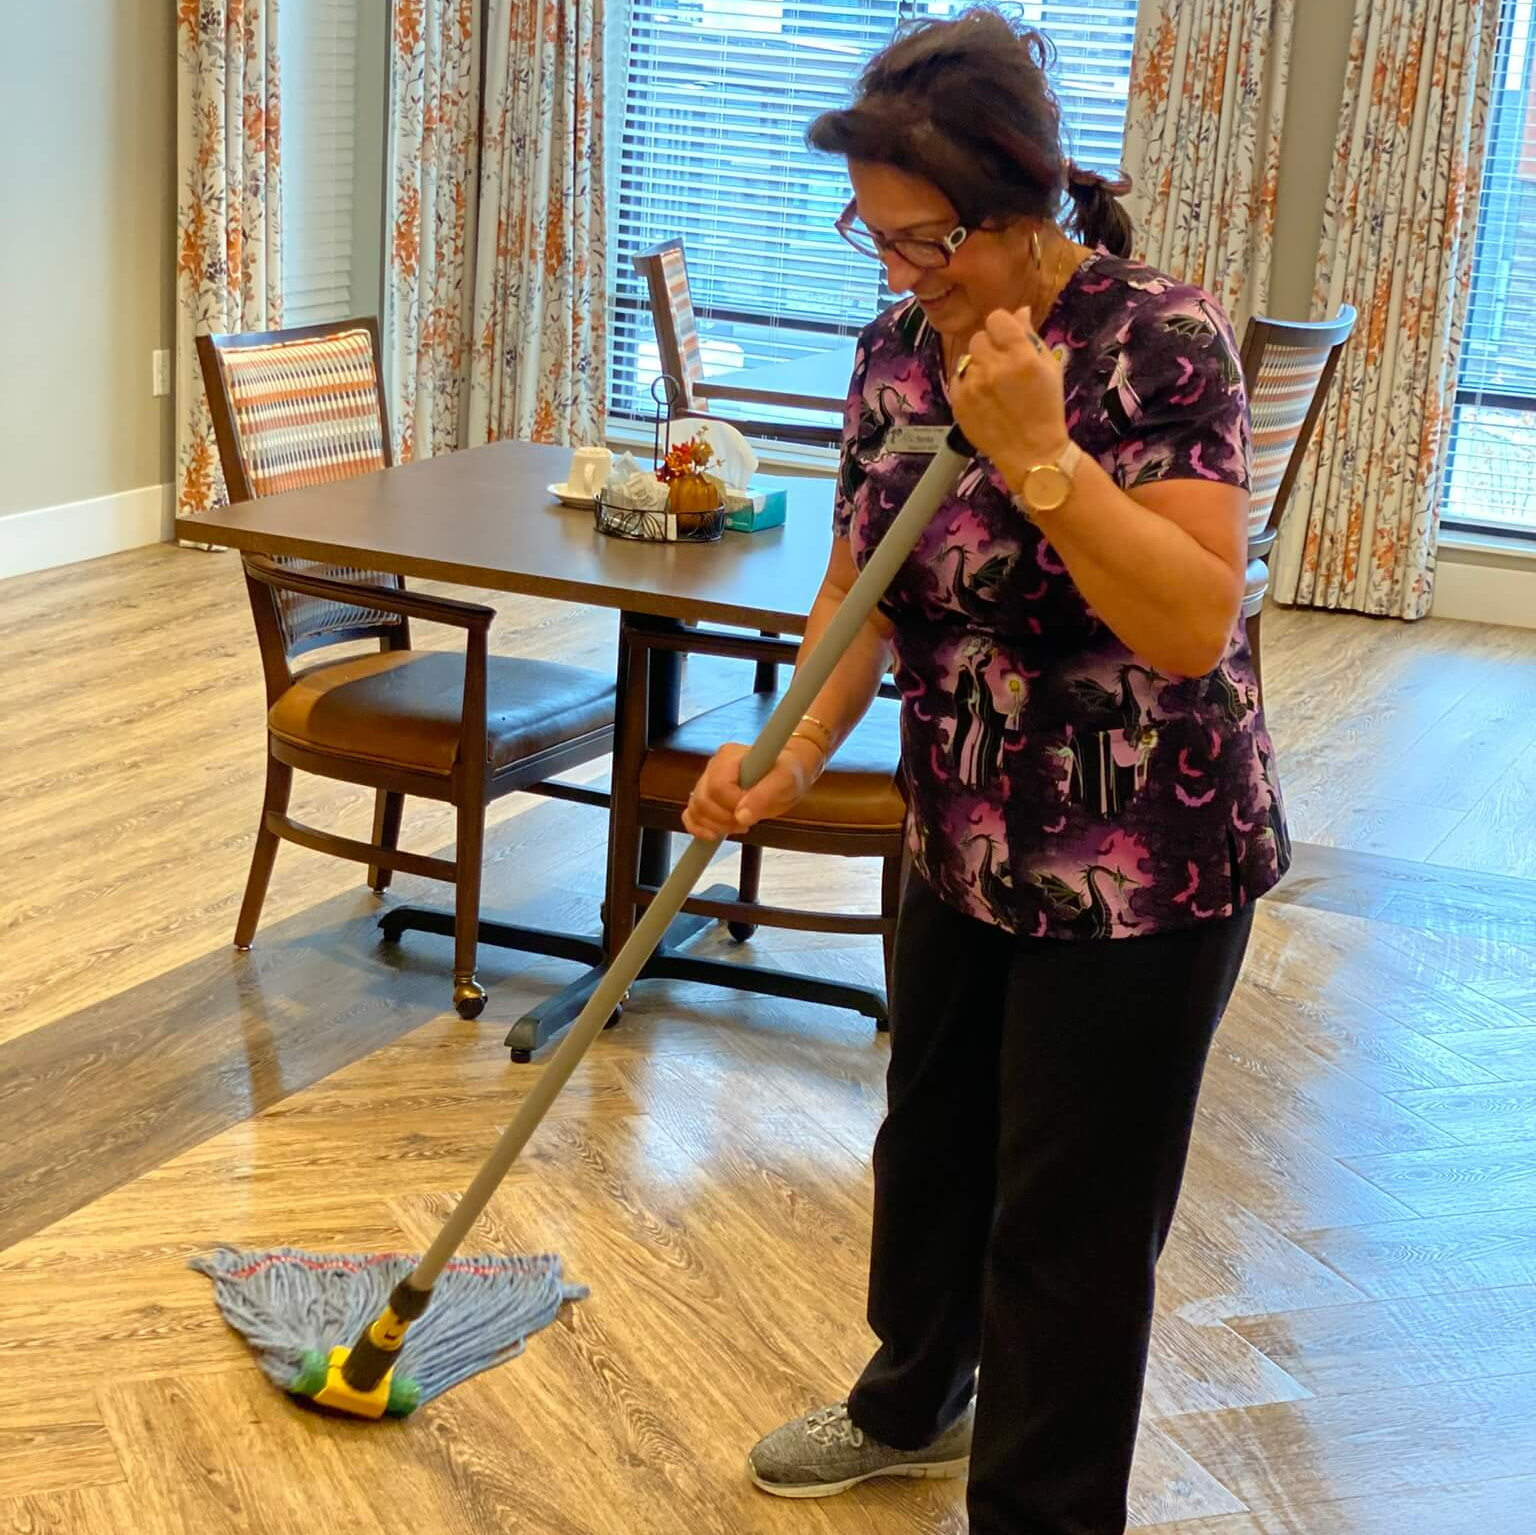 housekeepers sweeping up dust on the floor